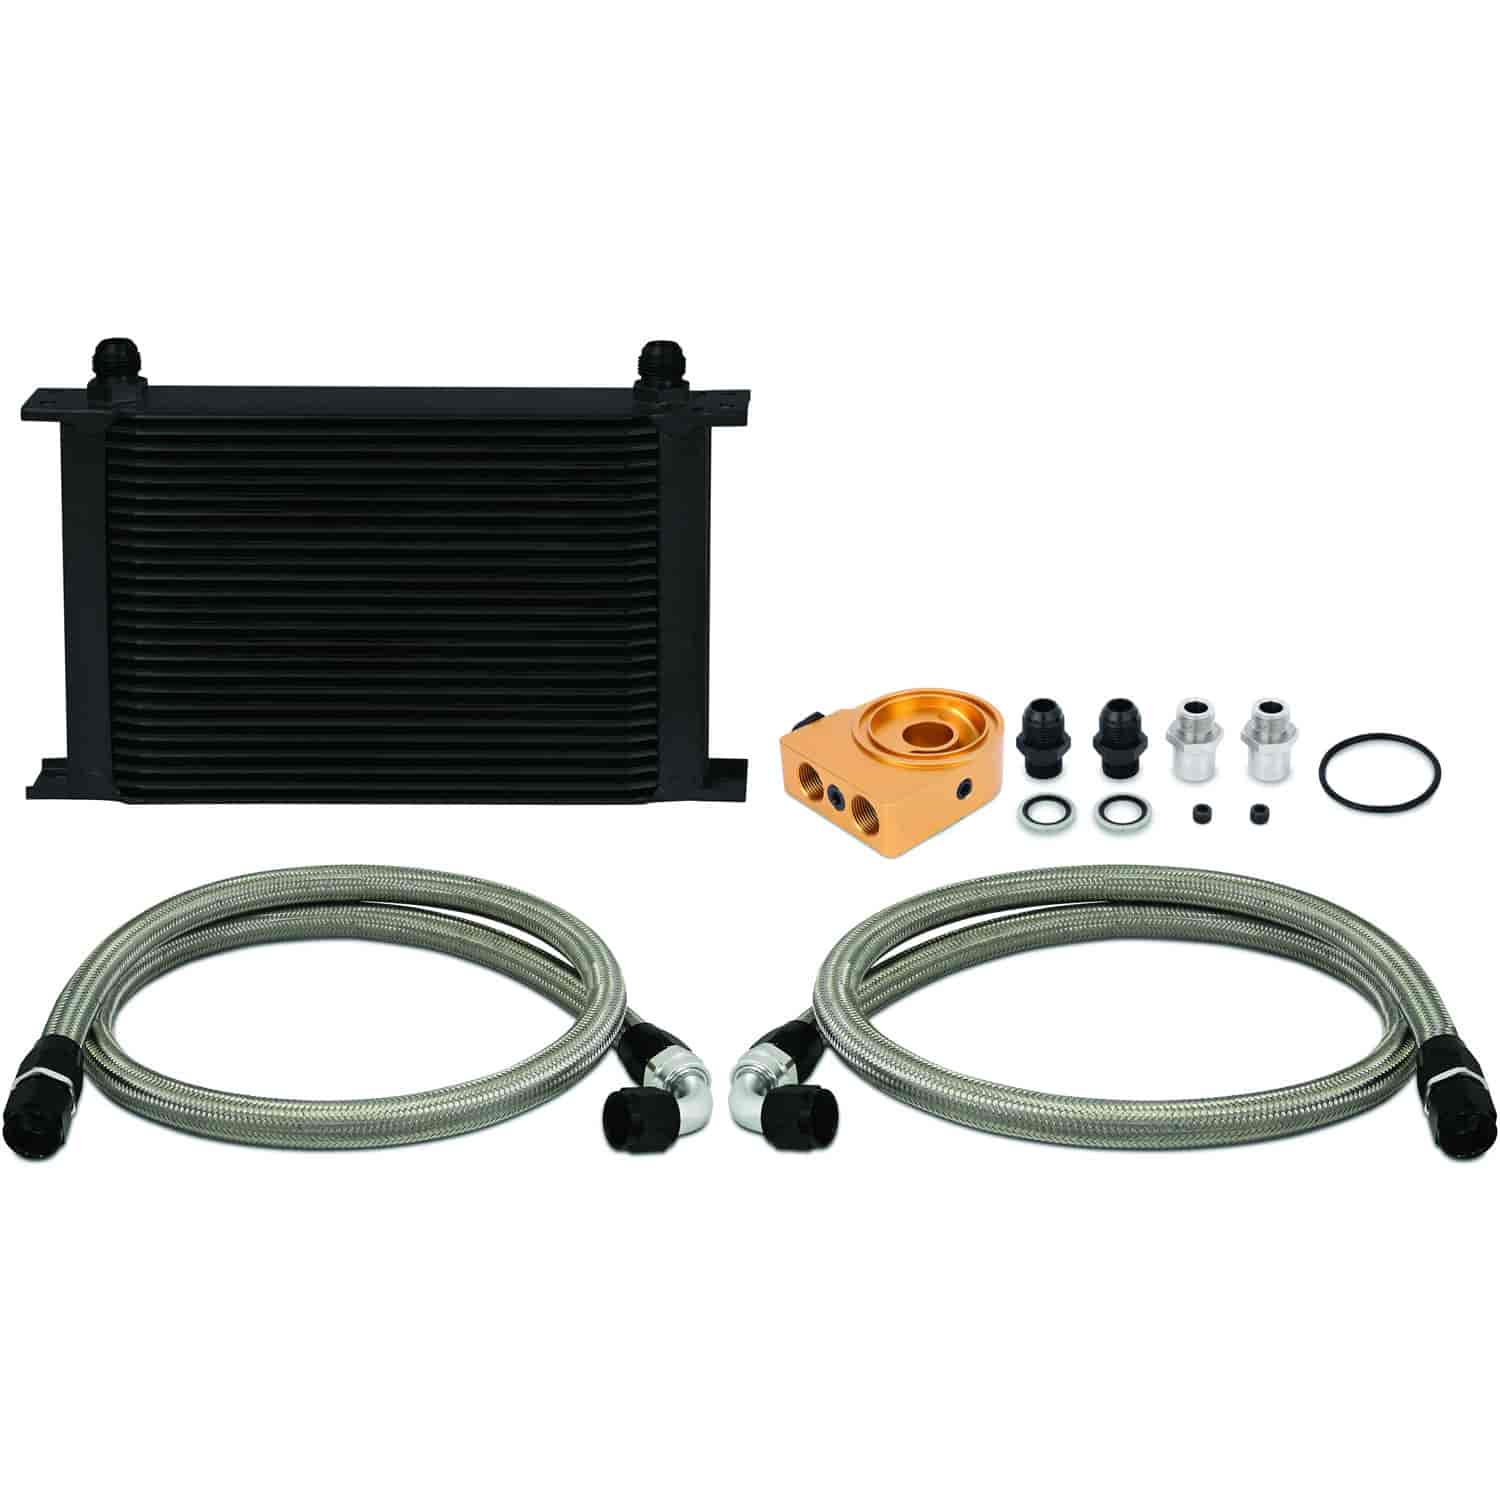 Universal Thermostatic Oil Cooler Kit Black 25 Row